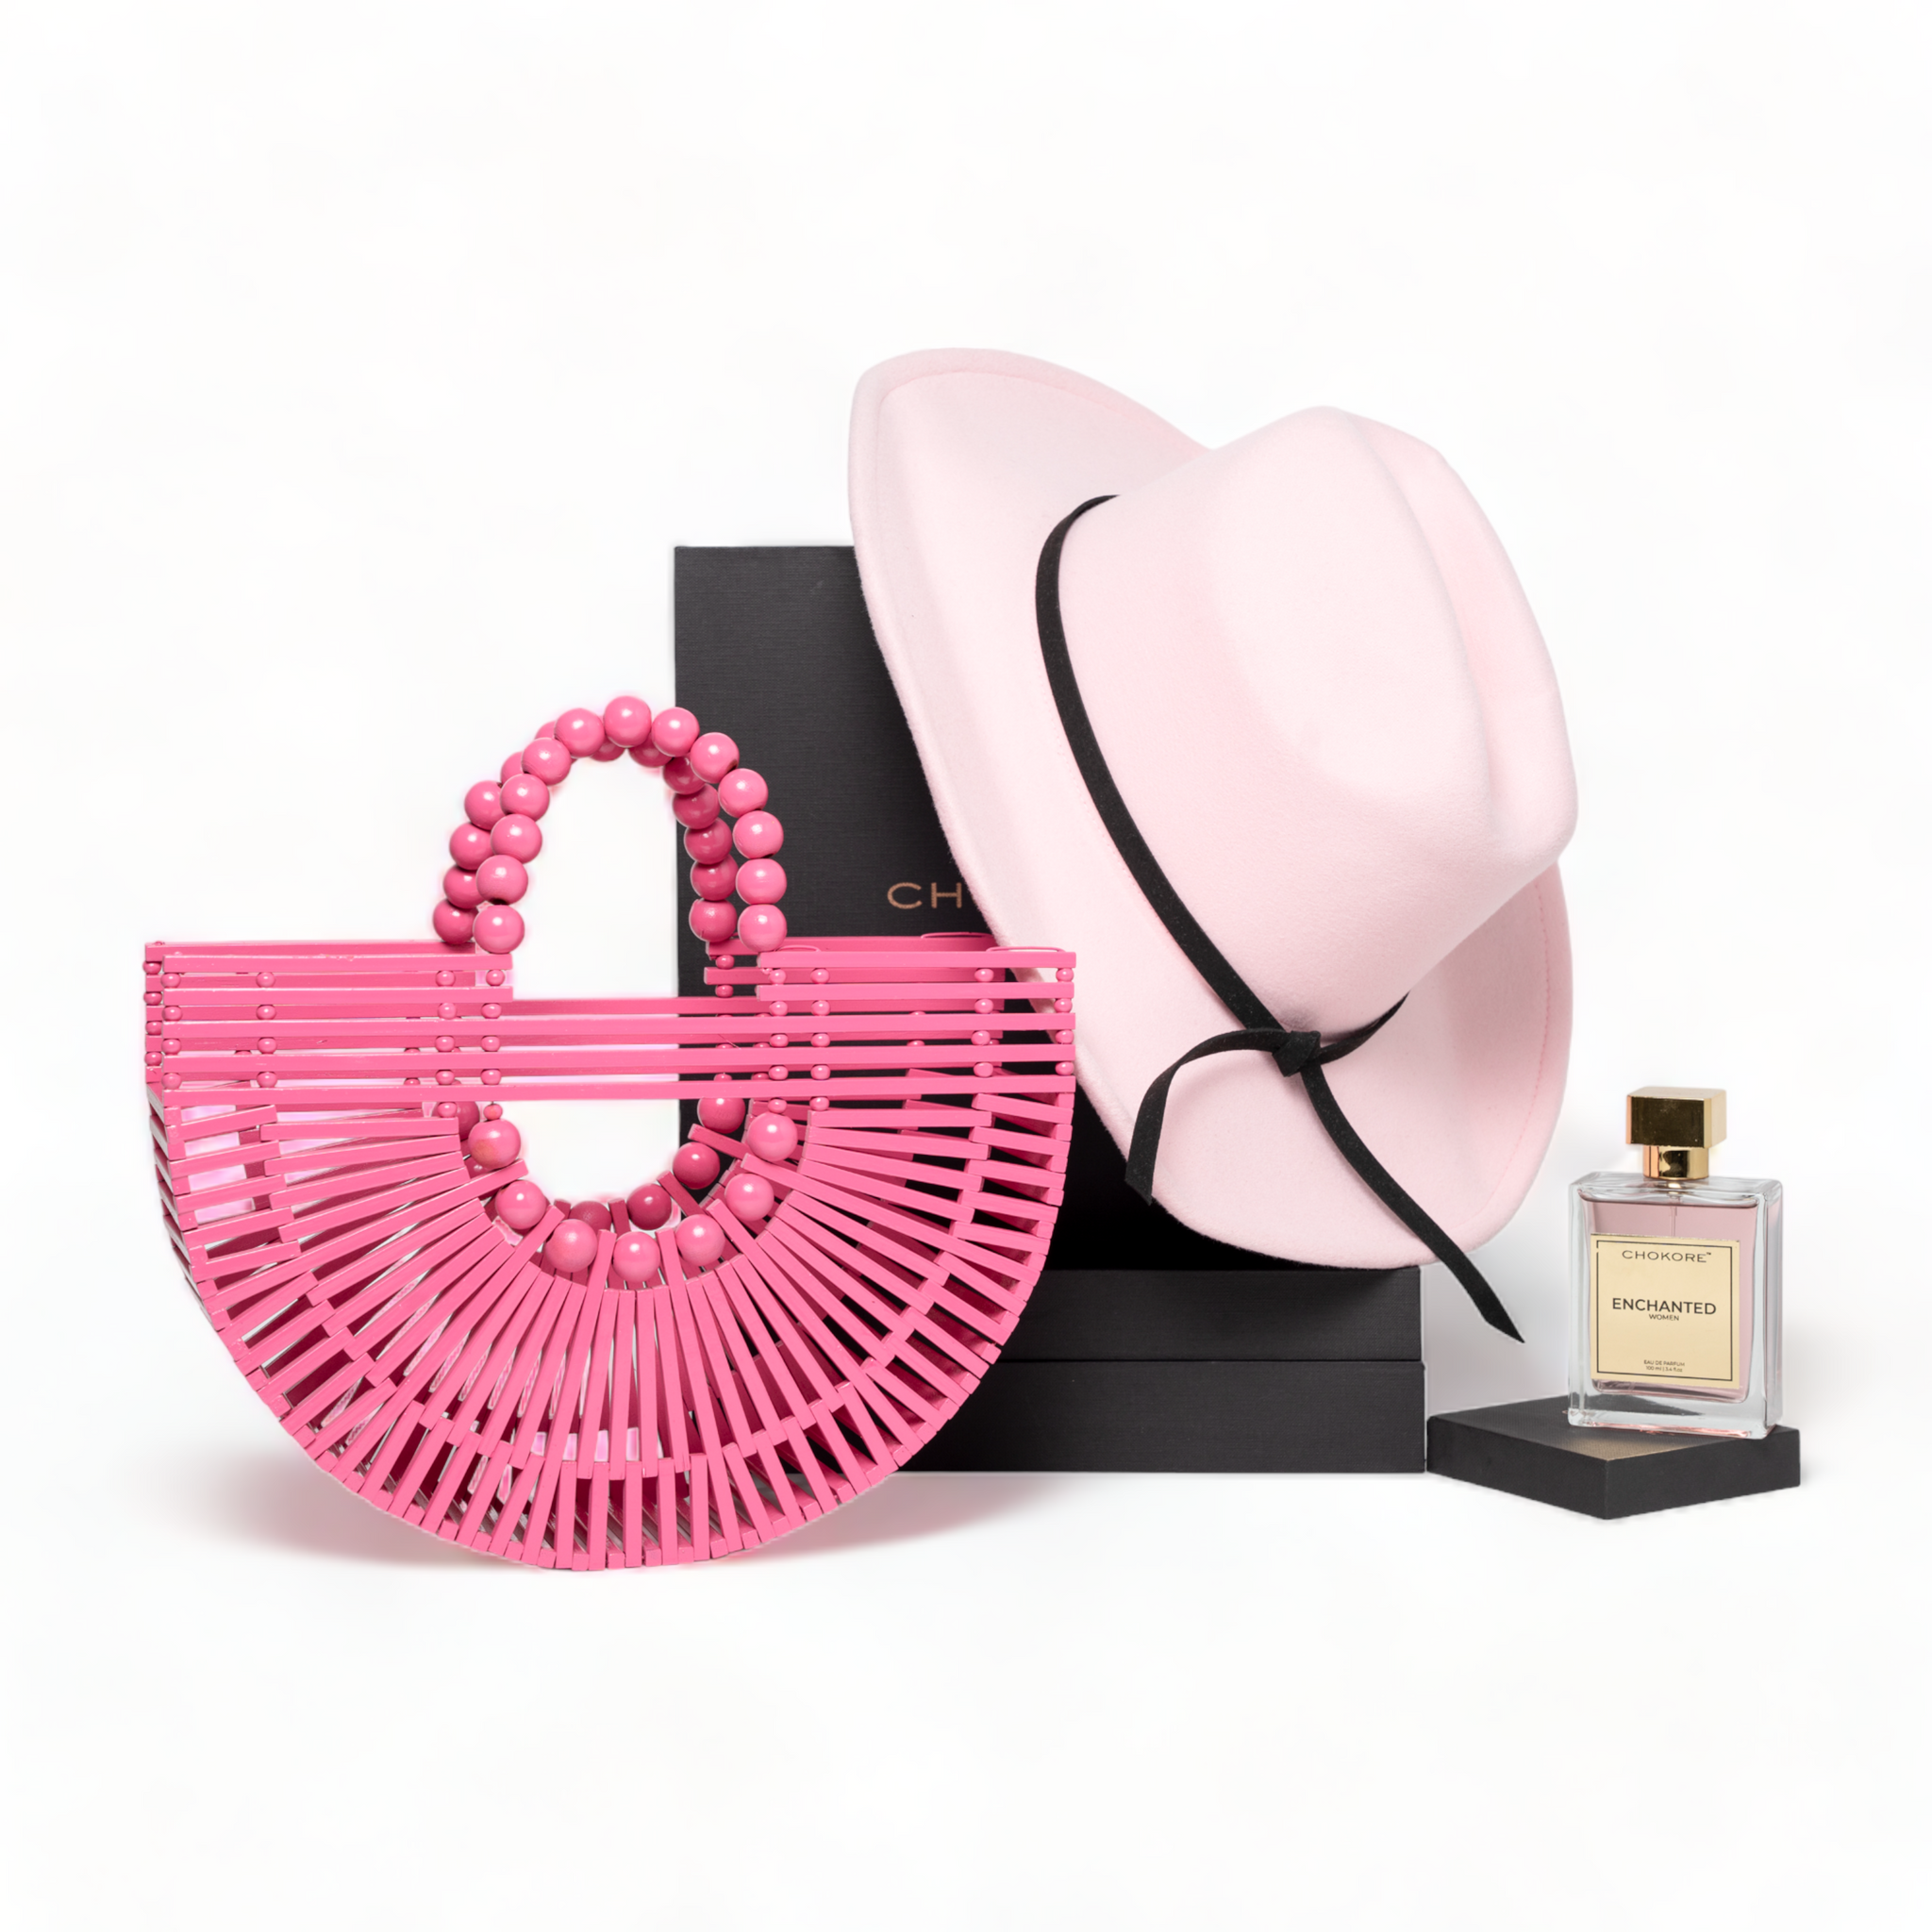 Chokore Special 3-in-1 Gift Set for Her (Bamboo Bag Pink, Cowgirl Hat, & 100 ml Enchanted Perfume)